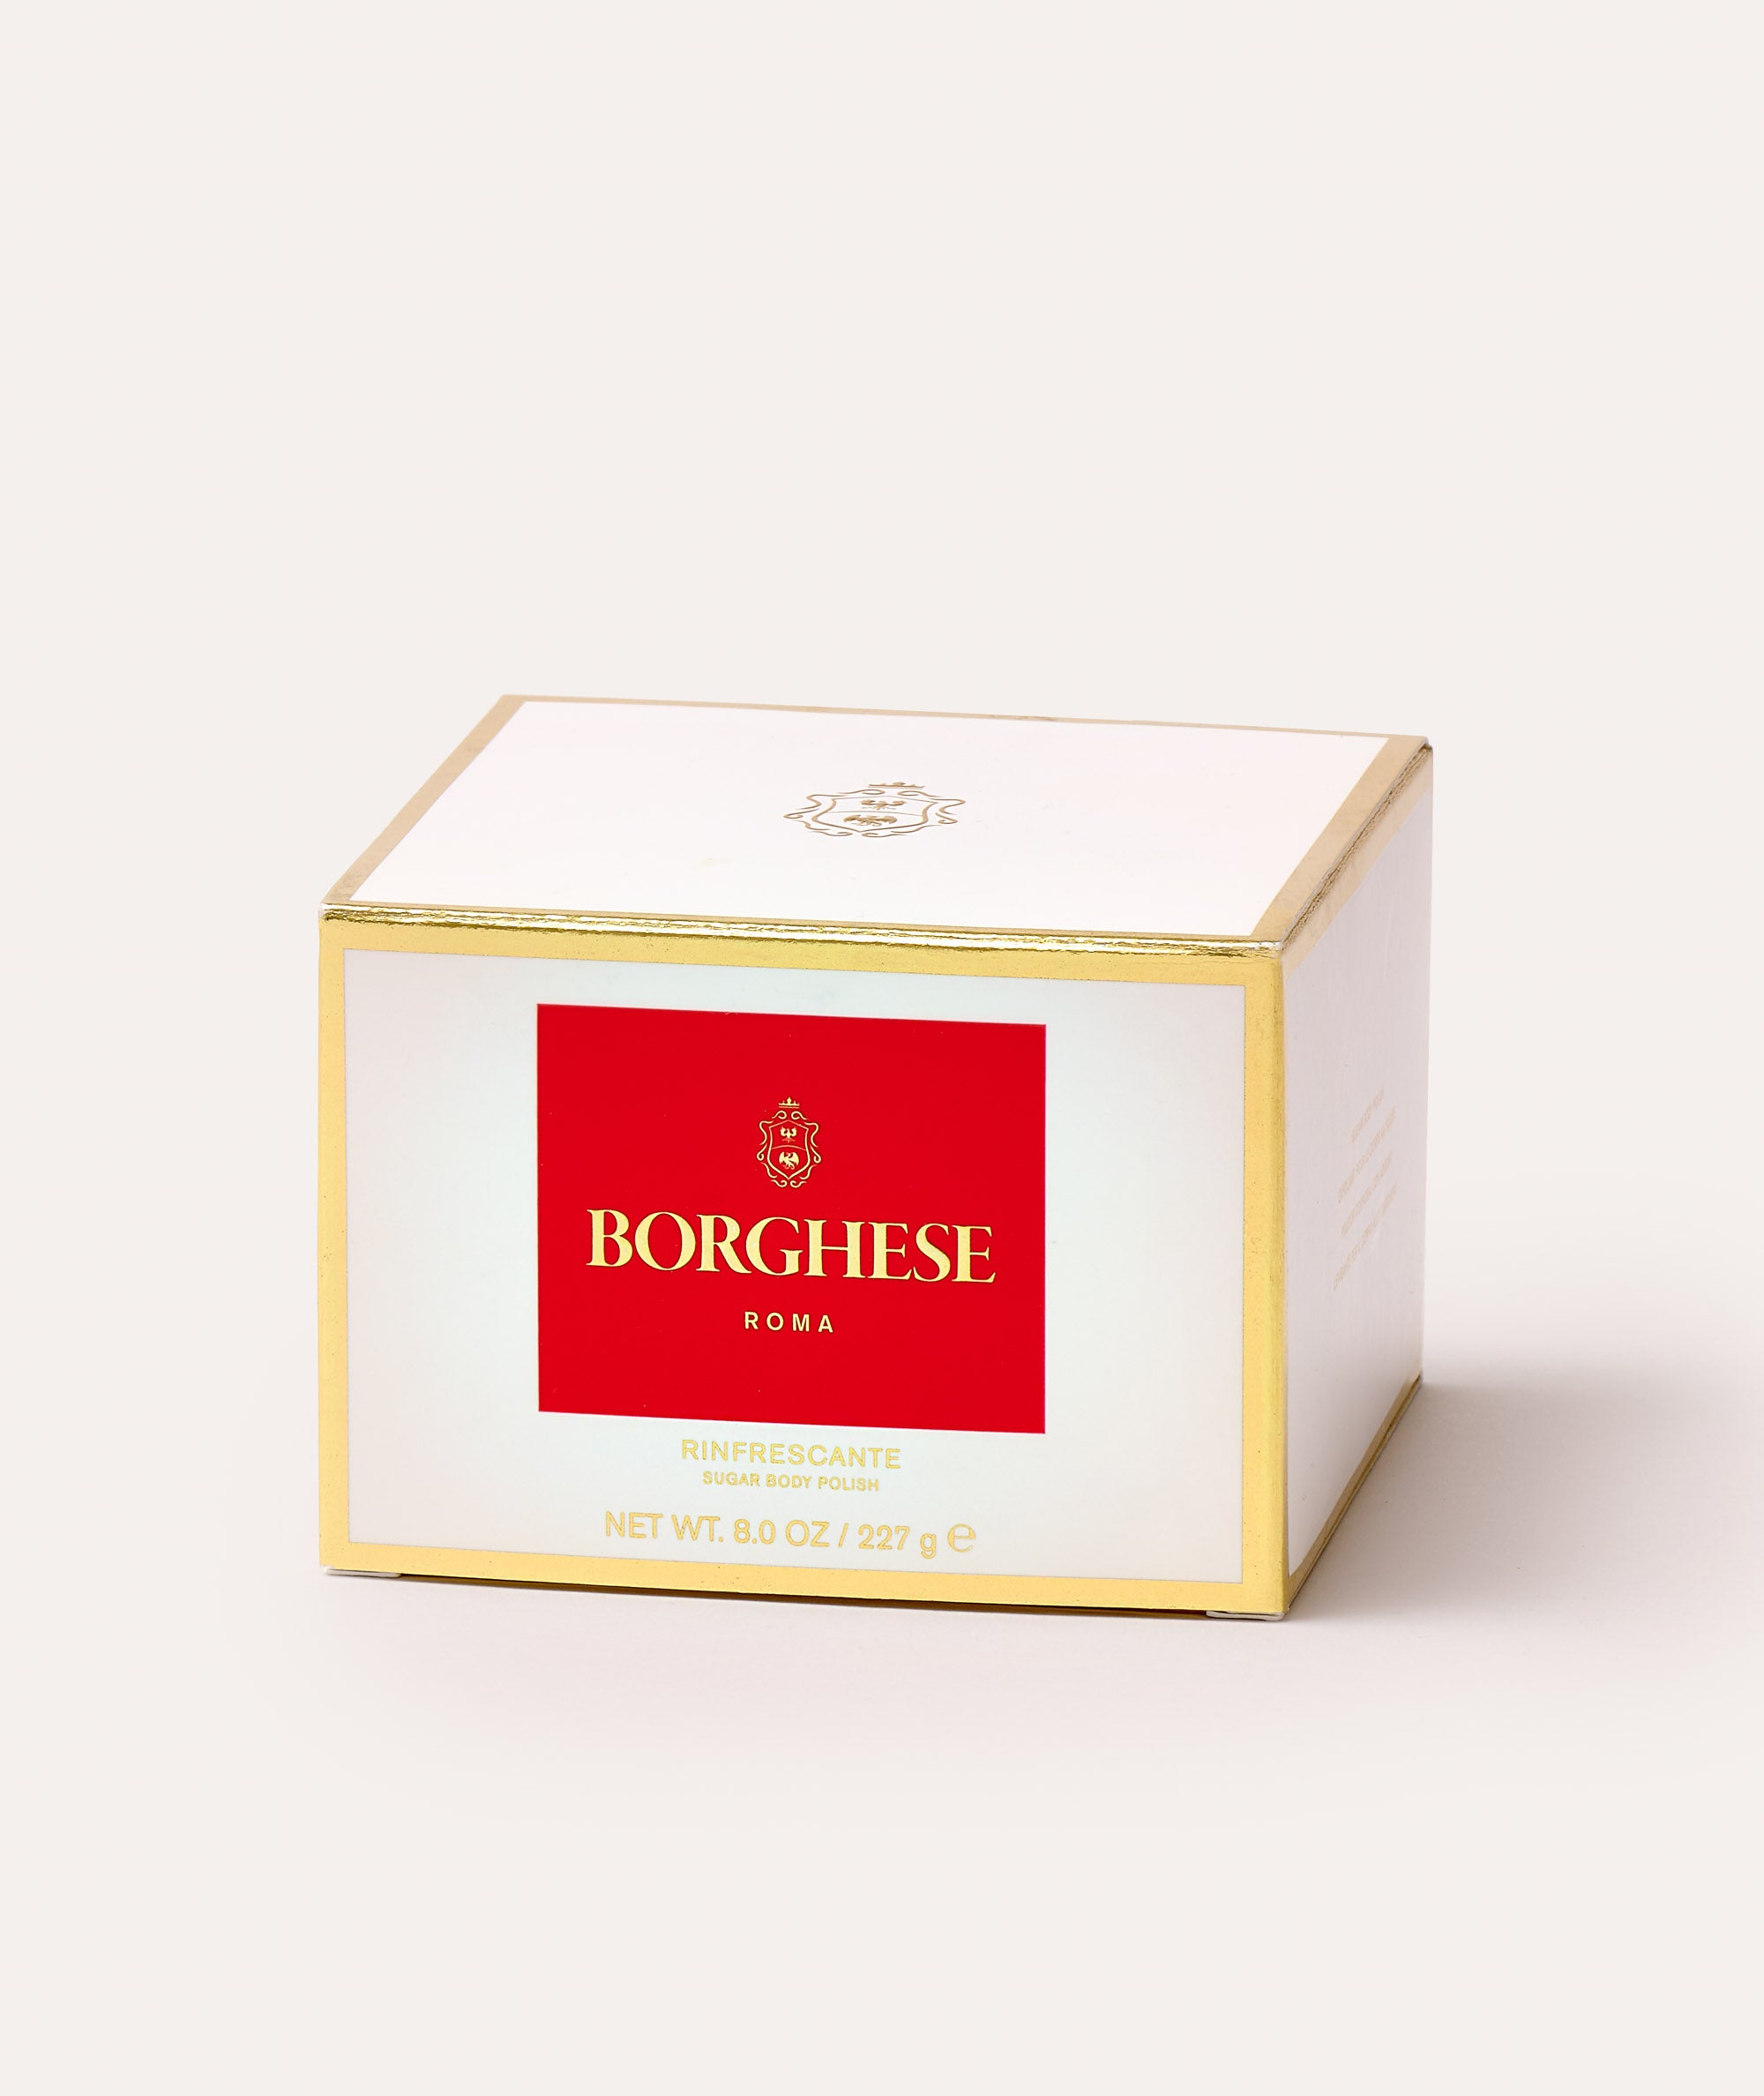 This is a picture of the Borghese Rinfrescante Sugar Body Scrub box